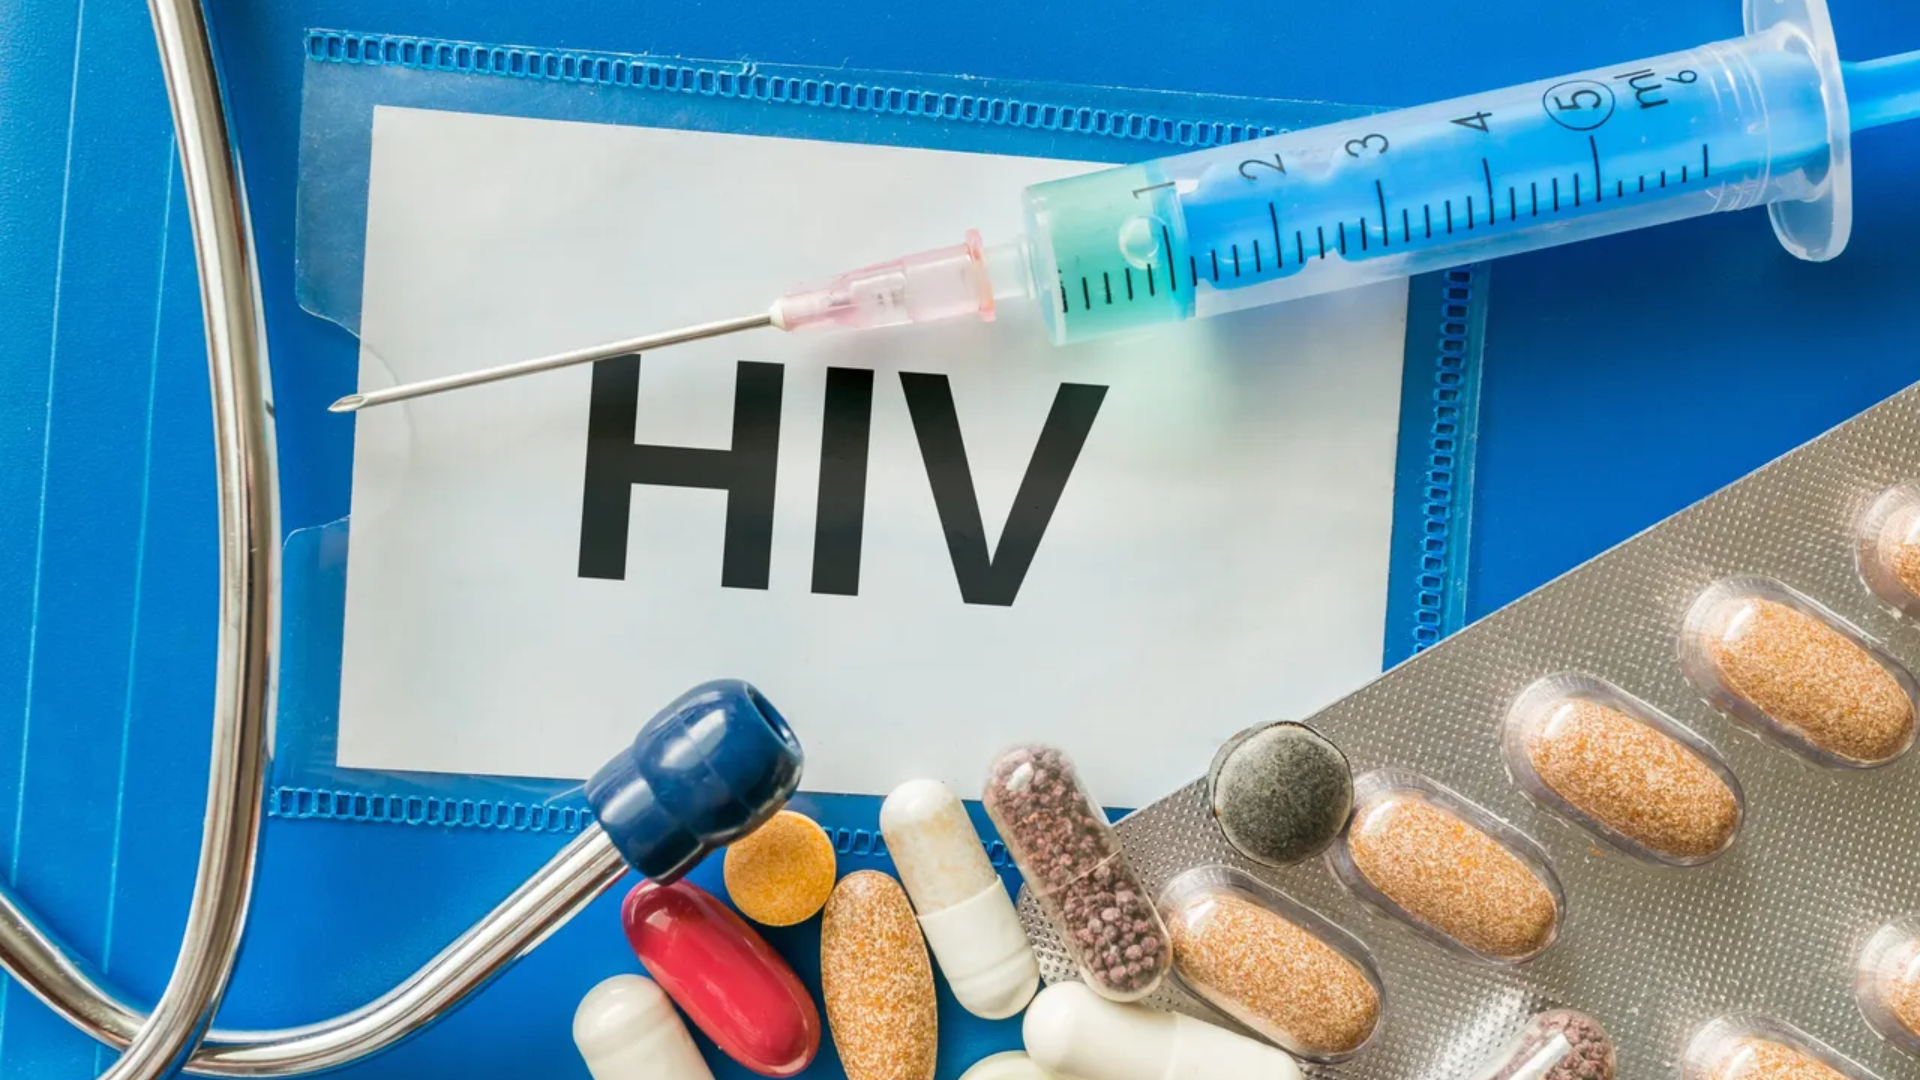 Tripura’s Student Health Crisis: Understanding HIV/AIDS Care And Challenges